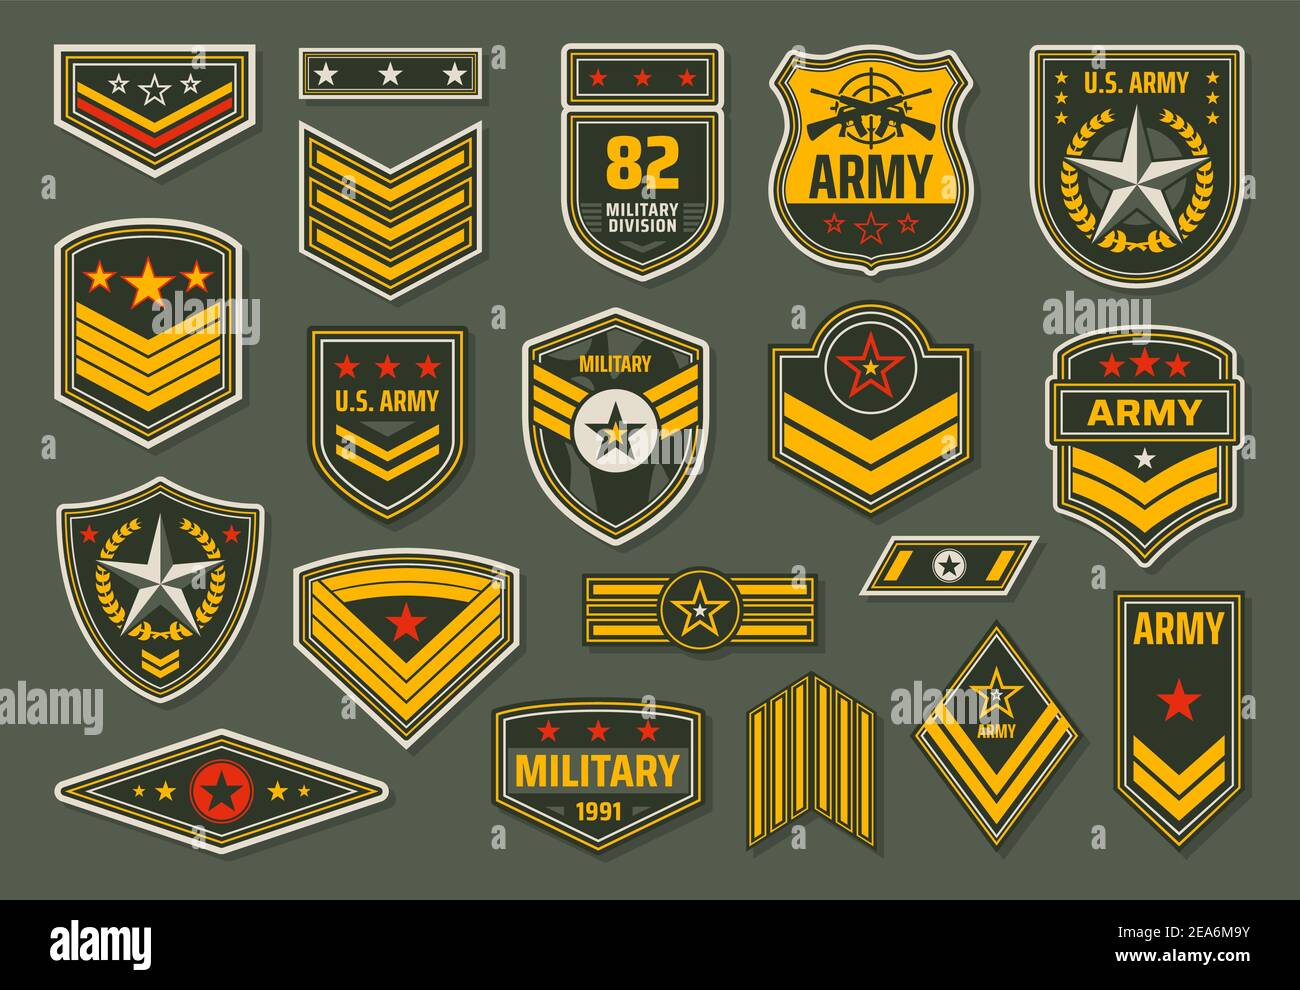 USA armed forces badges, military service staff ranks insignia. Army emblems, shoulder chevrons or epaulets with stars, rate stripes and service rifle Stock Vector